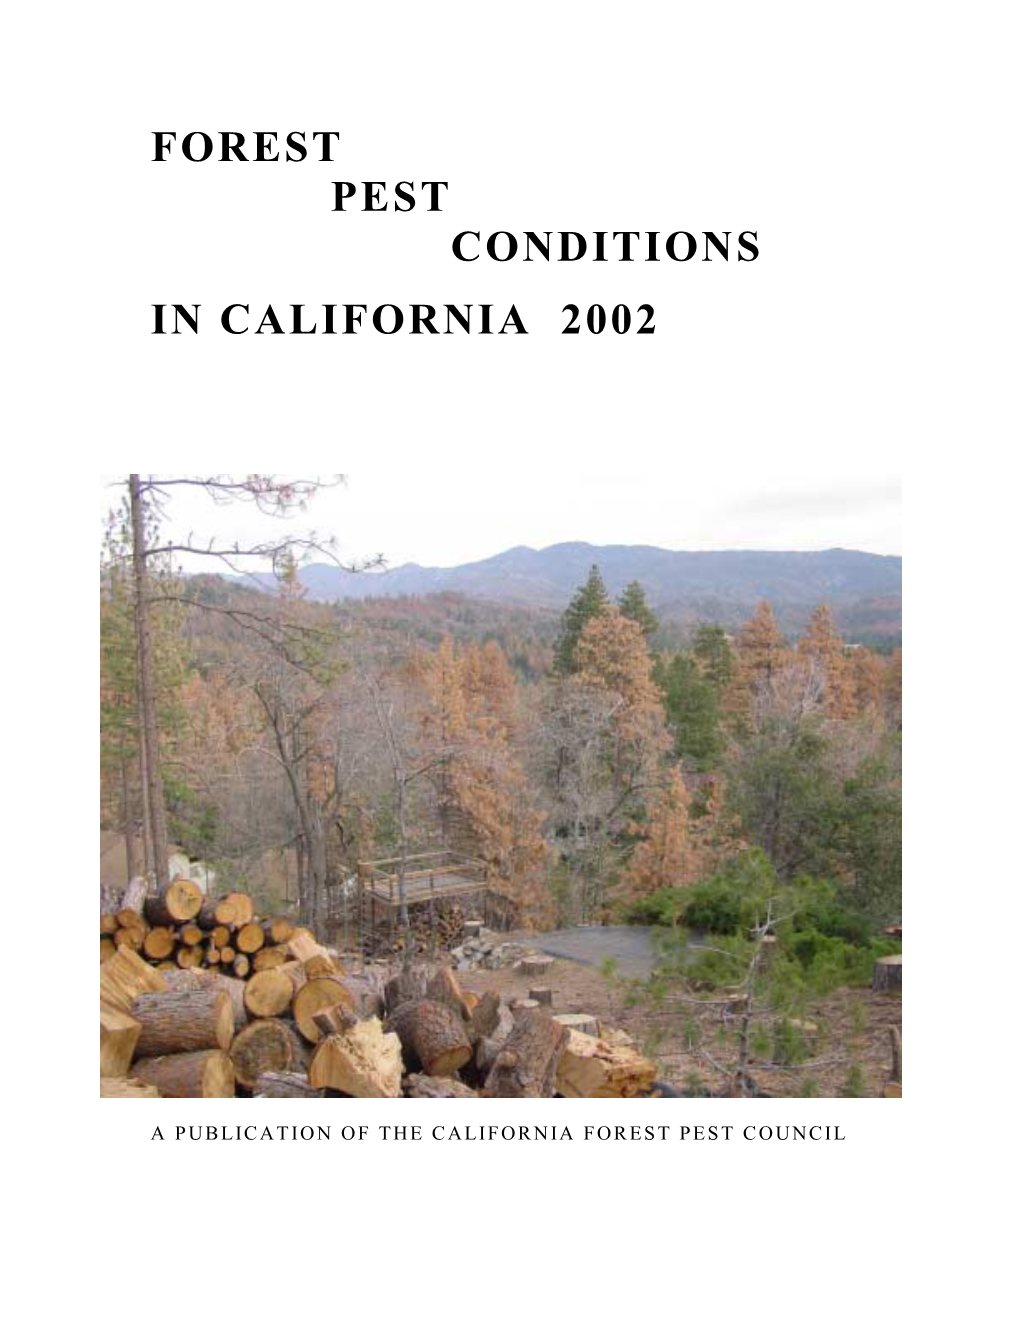 Forest Pest Conditions in California 2002